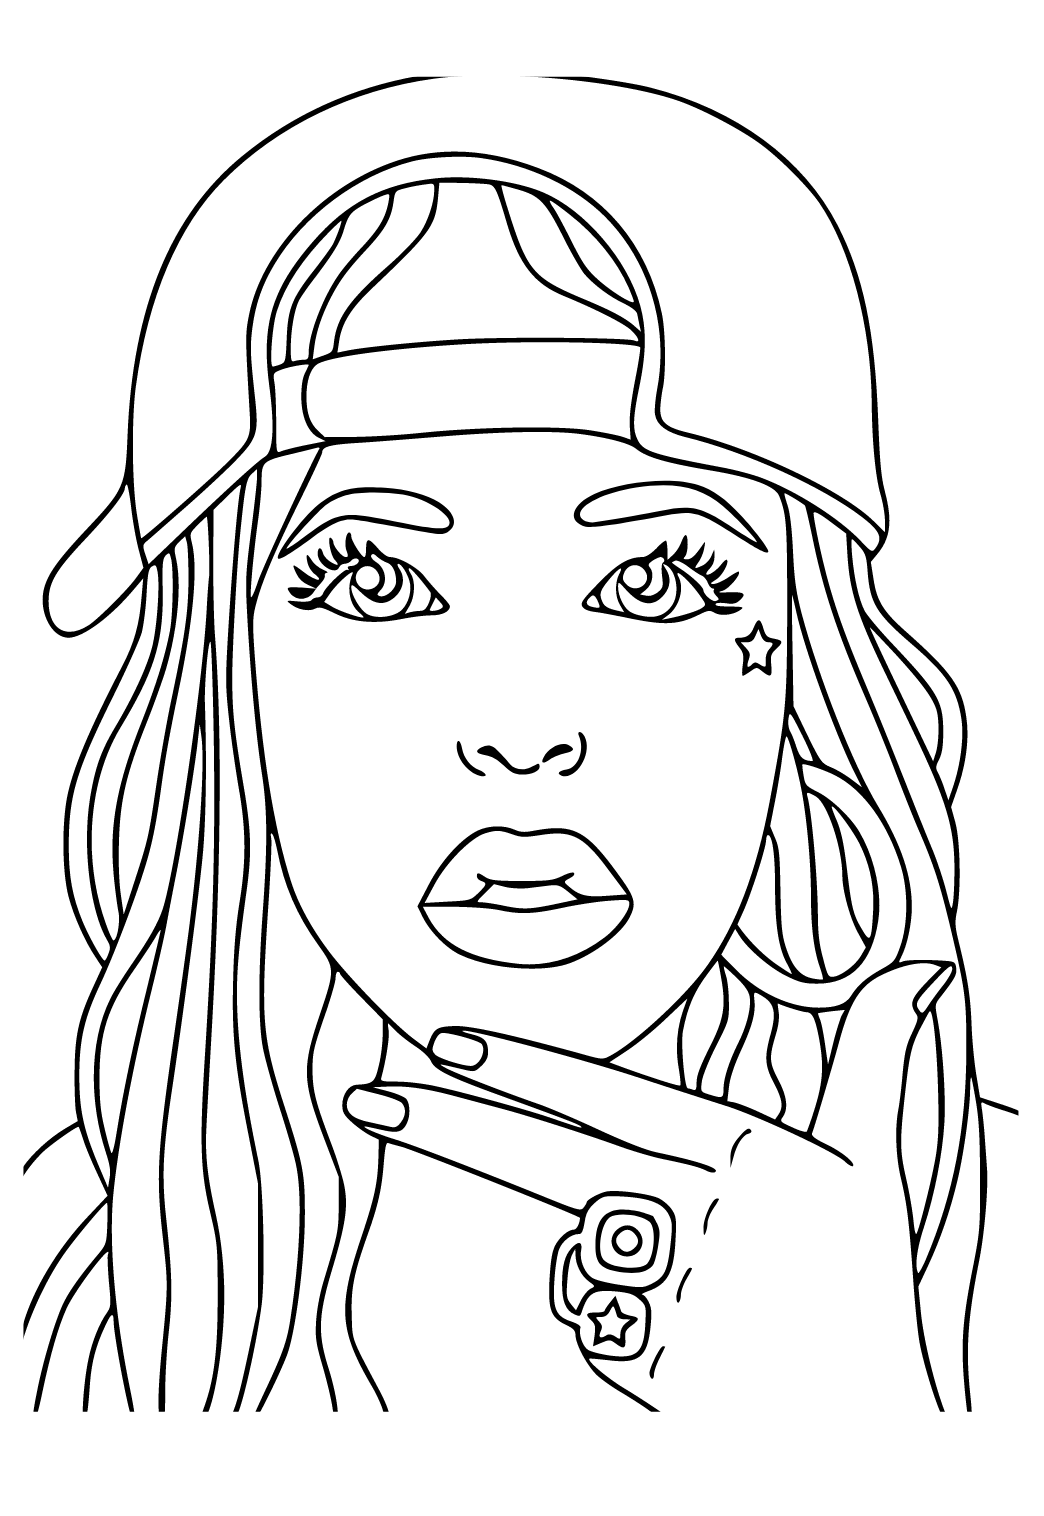 Free printable people cap coloring page for adults and kids